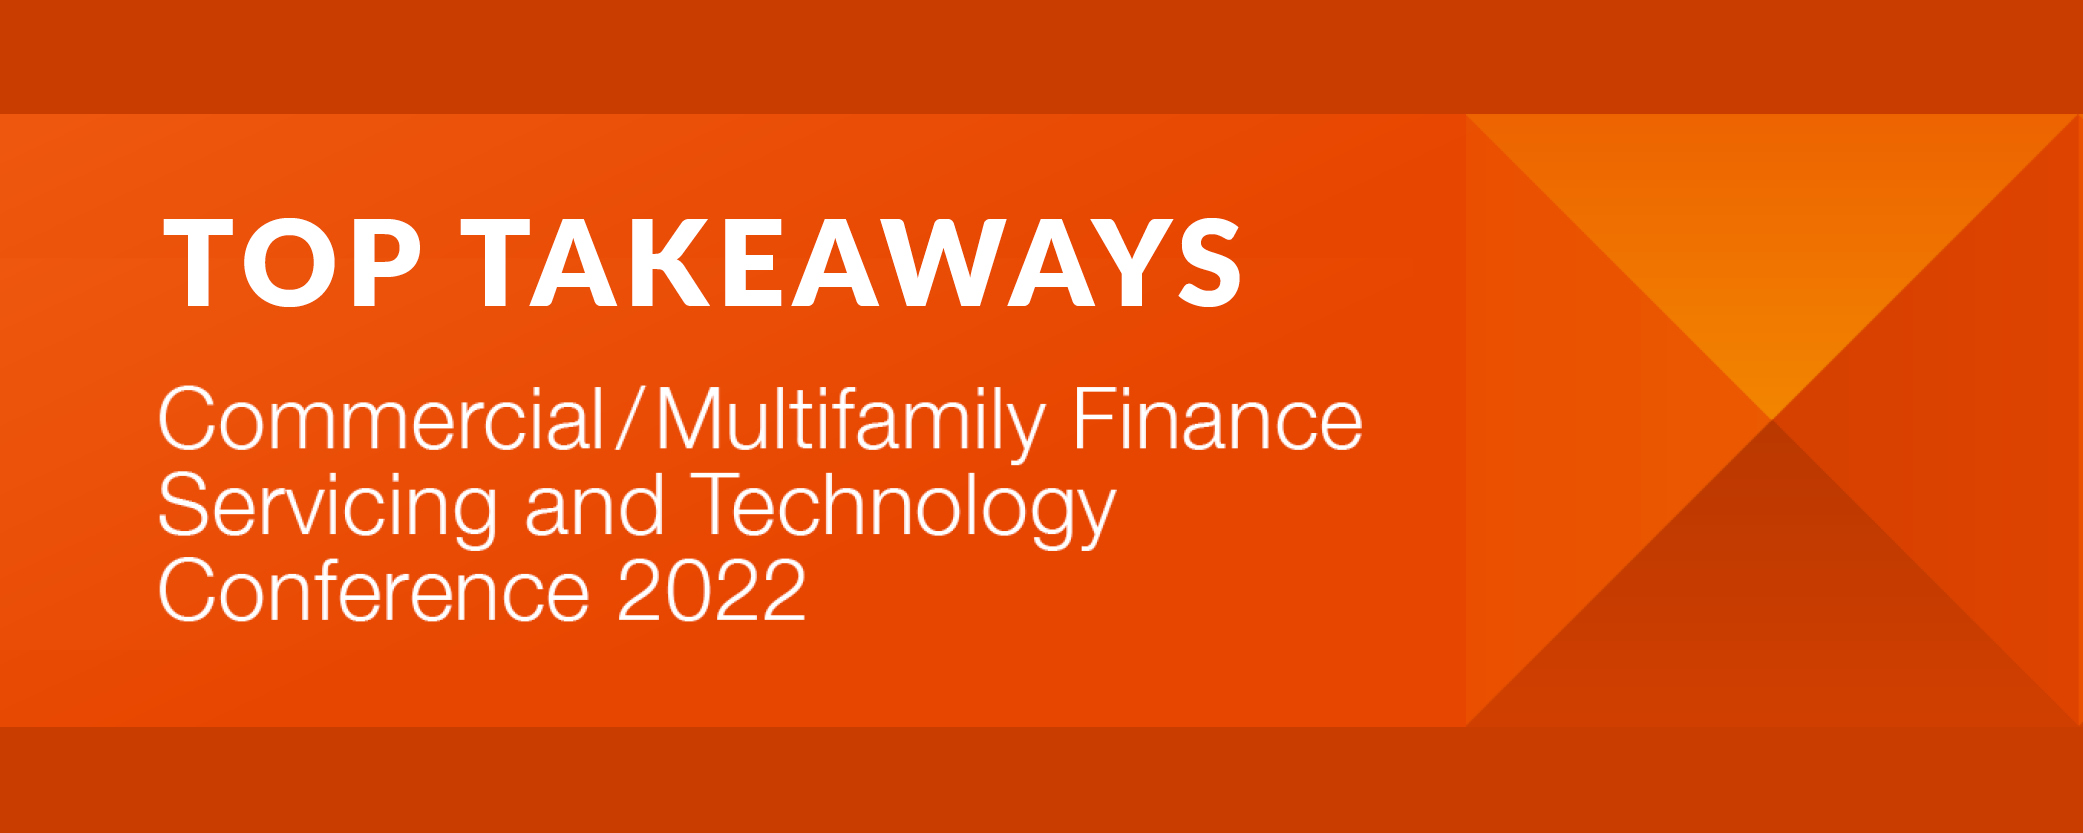 Top takeaways: mba’s commercial/multifamily finance and technology conference 2022